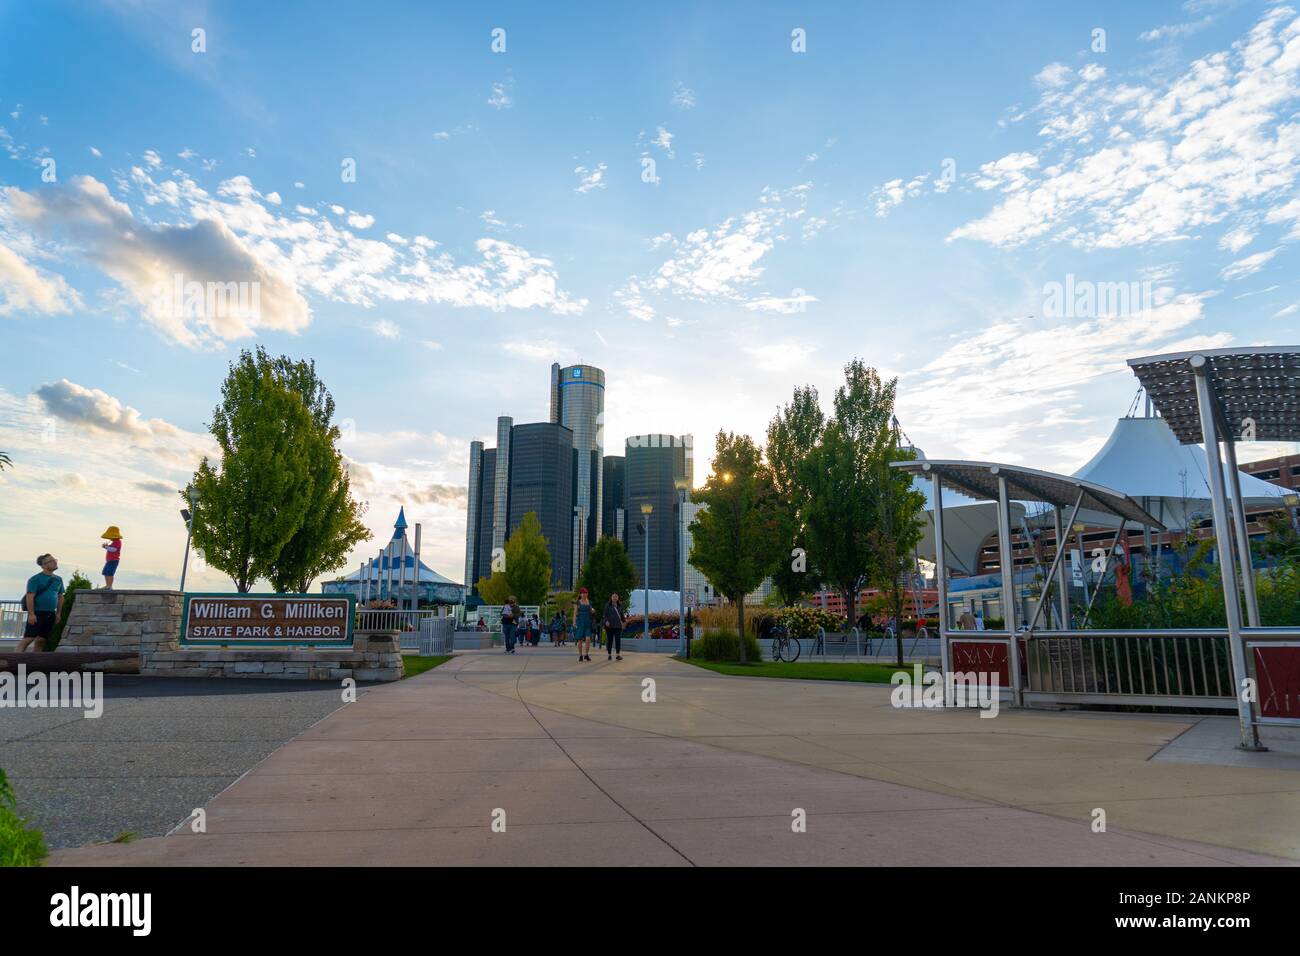 Detroit, Mi - September 7, 2019: People enjoying the recent instillation of the Millikan state park and riverwalk leading up to downtown detroit Stock Photo